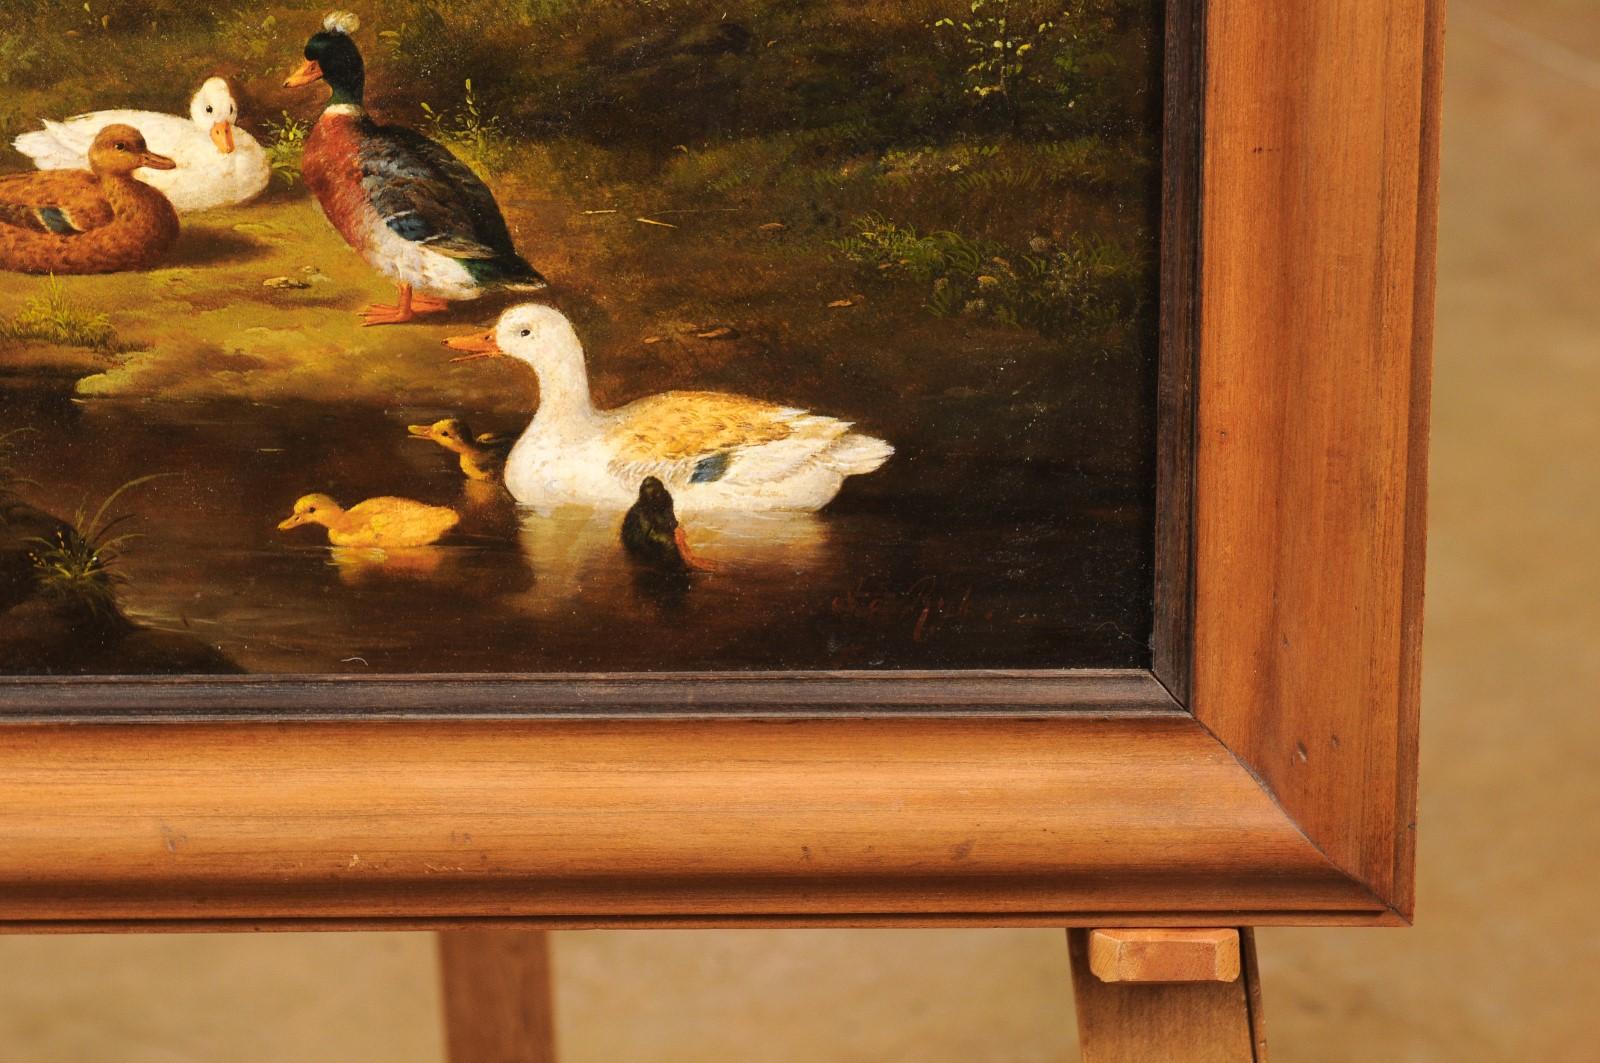 Wood French 1850s Oil on Panel Baryard Painting with Ducks and Vibrant Colors For Sale